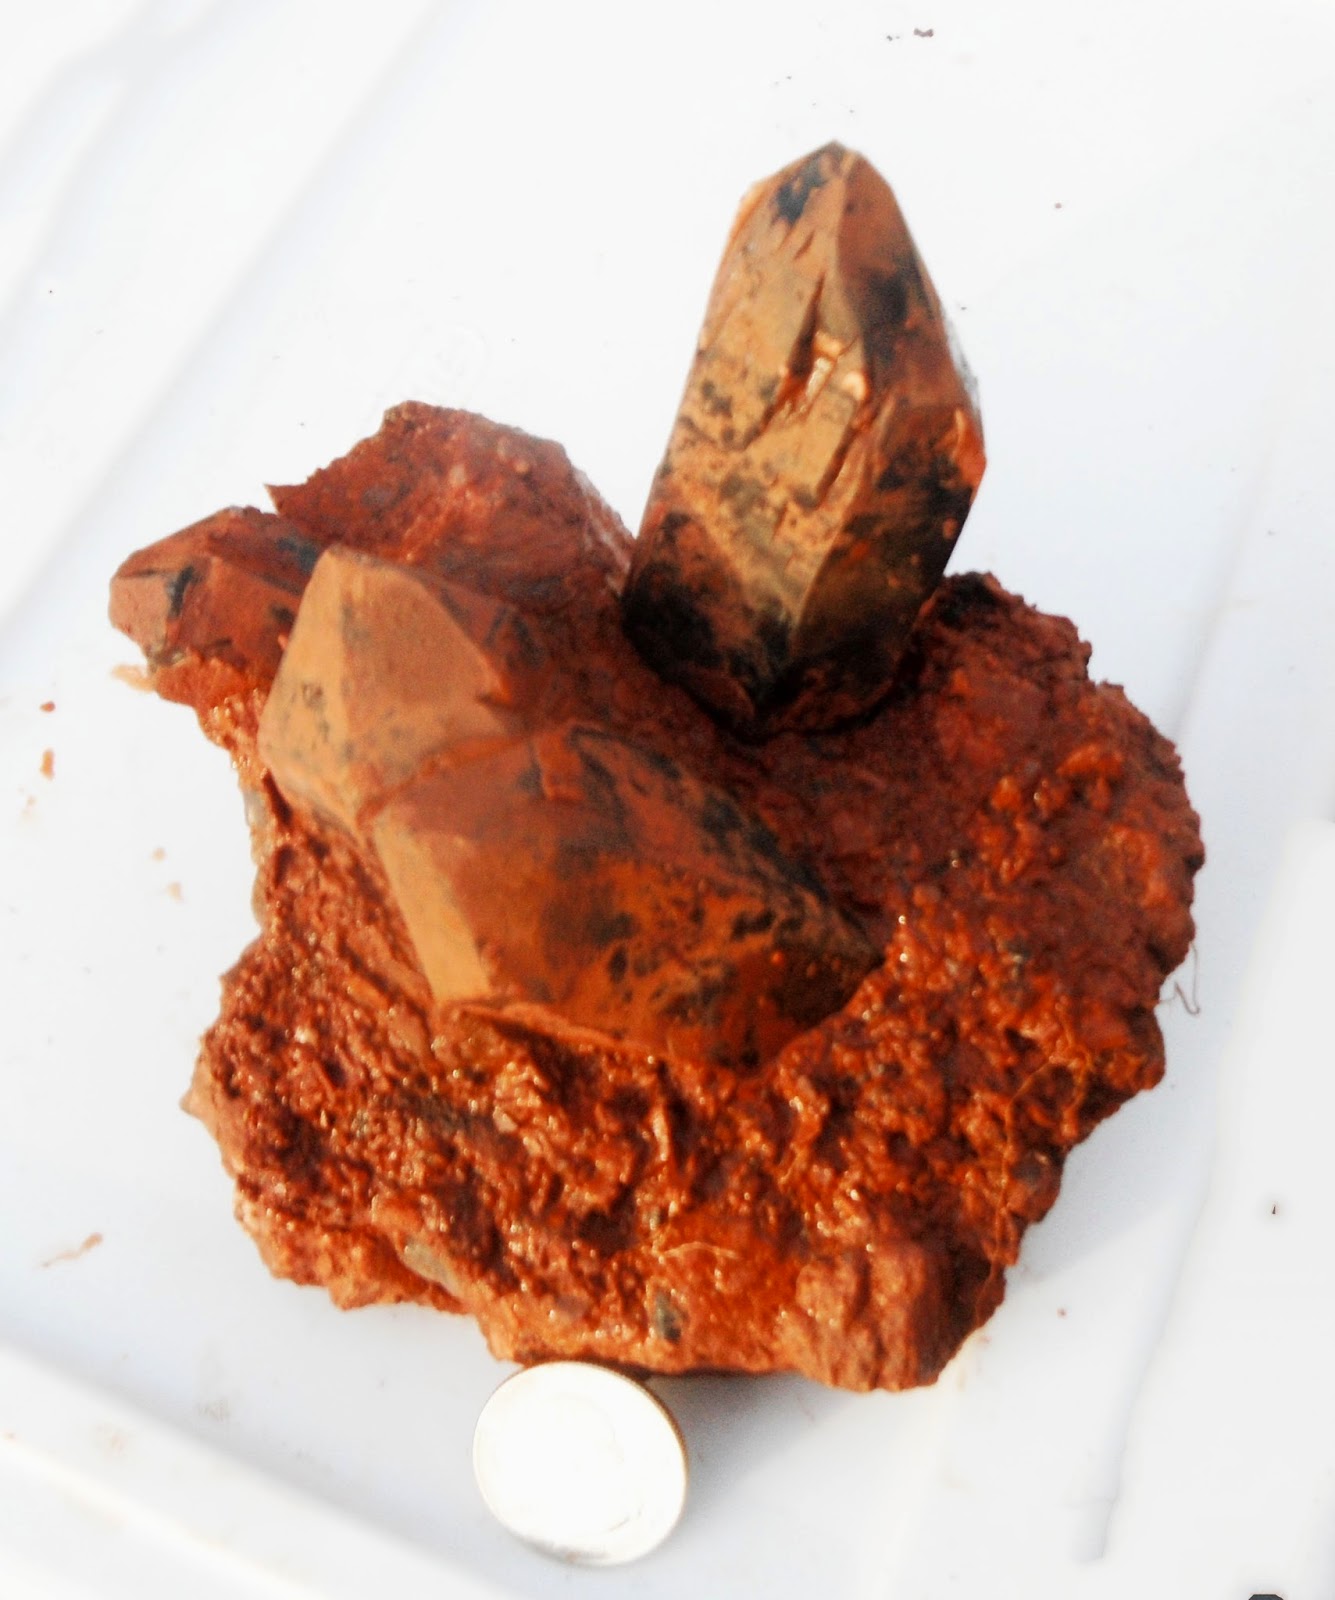 Rockhounding the Rockies: 300+ Smoky Quartz Crystals in 1 day at